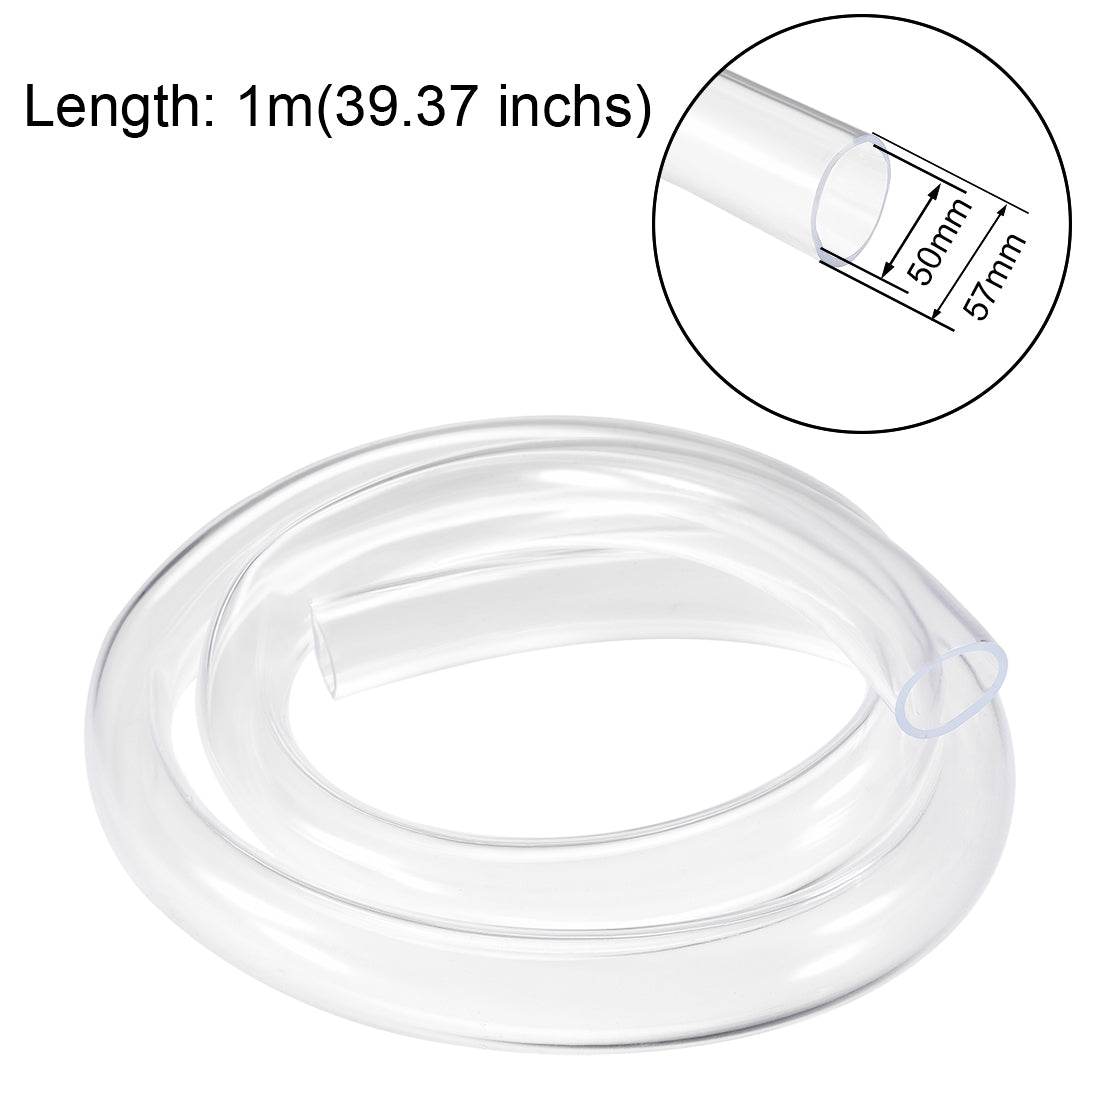 uxcell Uxcell PVC Hose Tube, 50mm(1.96") ID x 57mm(2.24") OD 1m Clear Vinyl Tubing